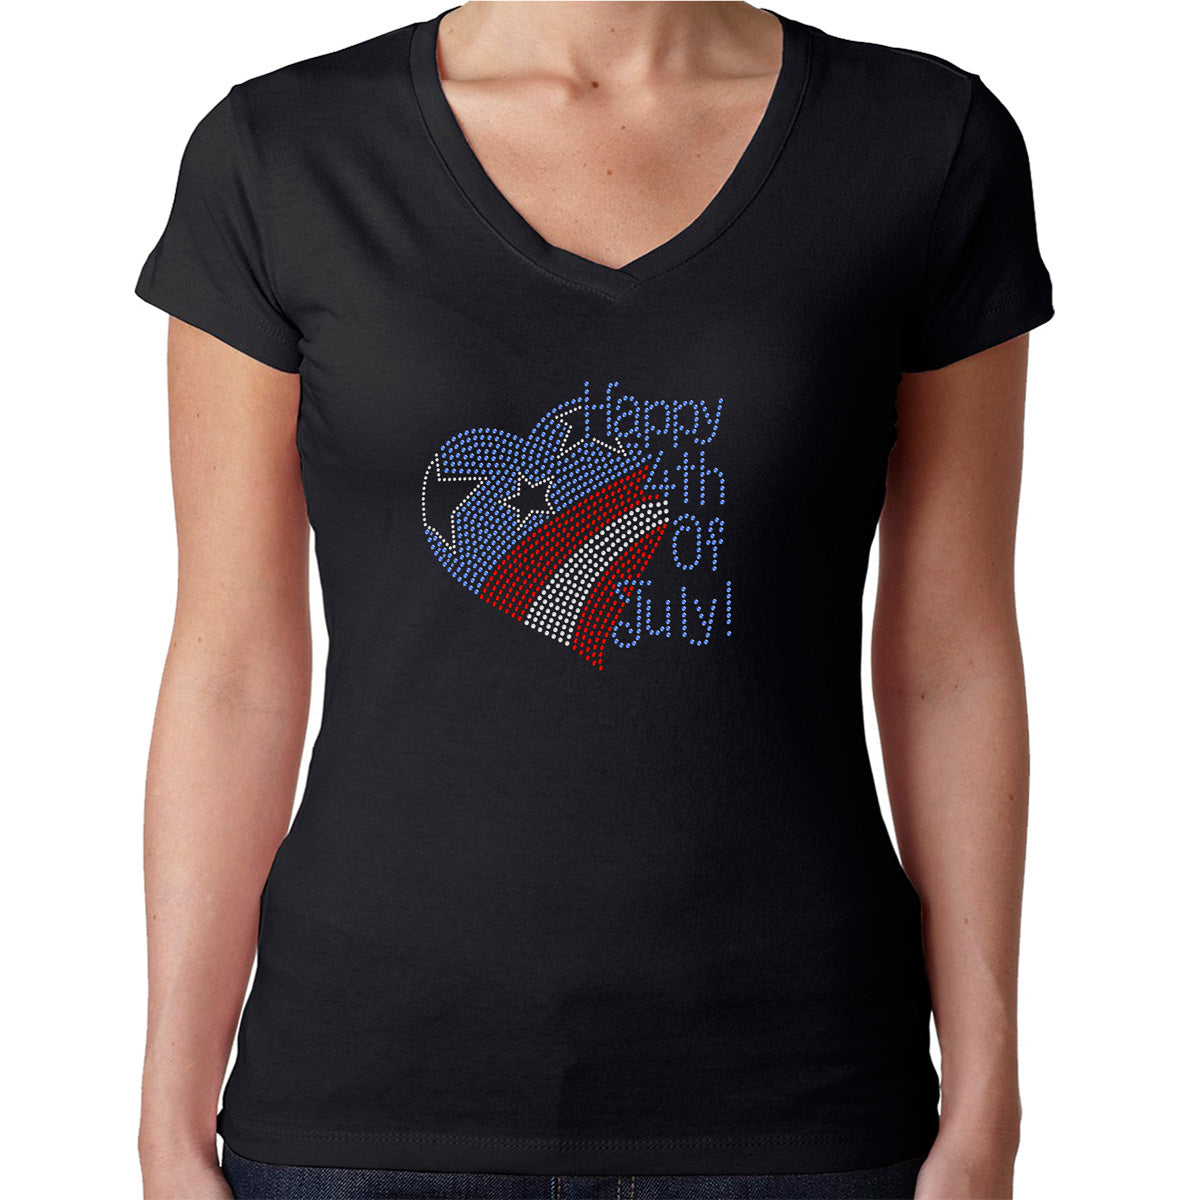 Womens T-Shirt Rhinestone Bling Black Fitted Tee Happy 4th of July Flag Heart